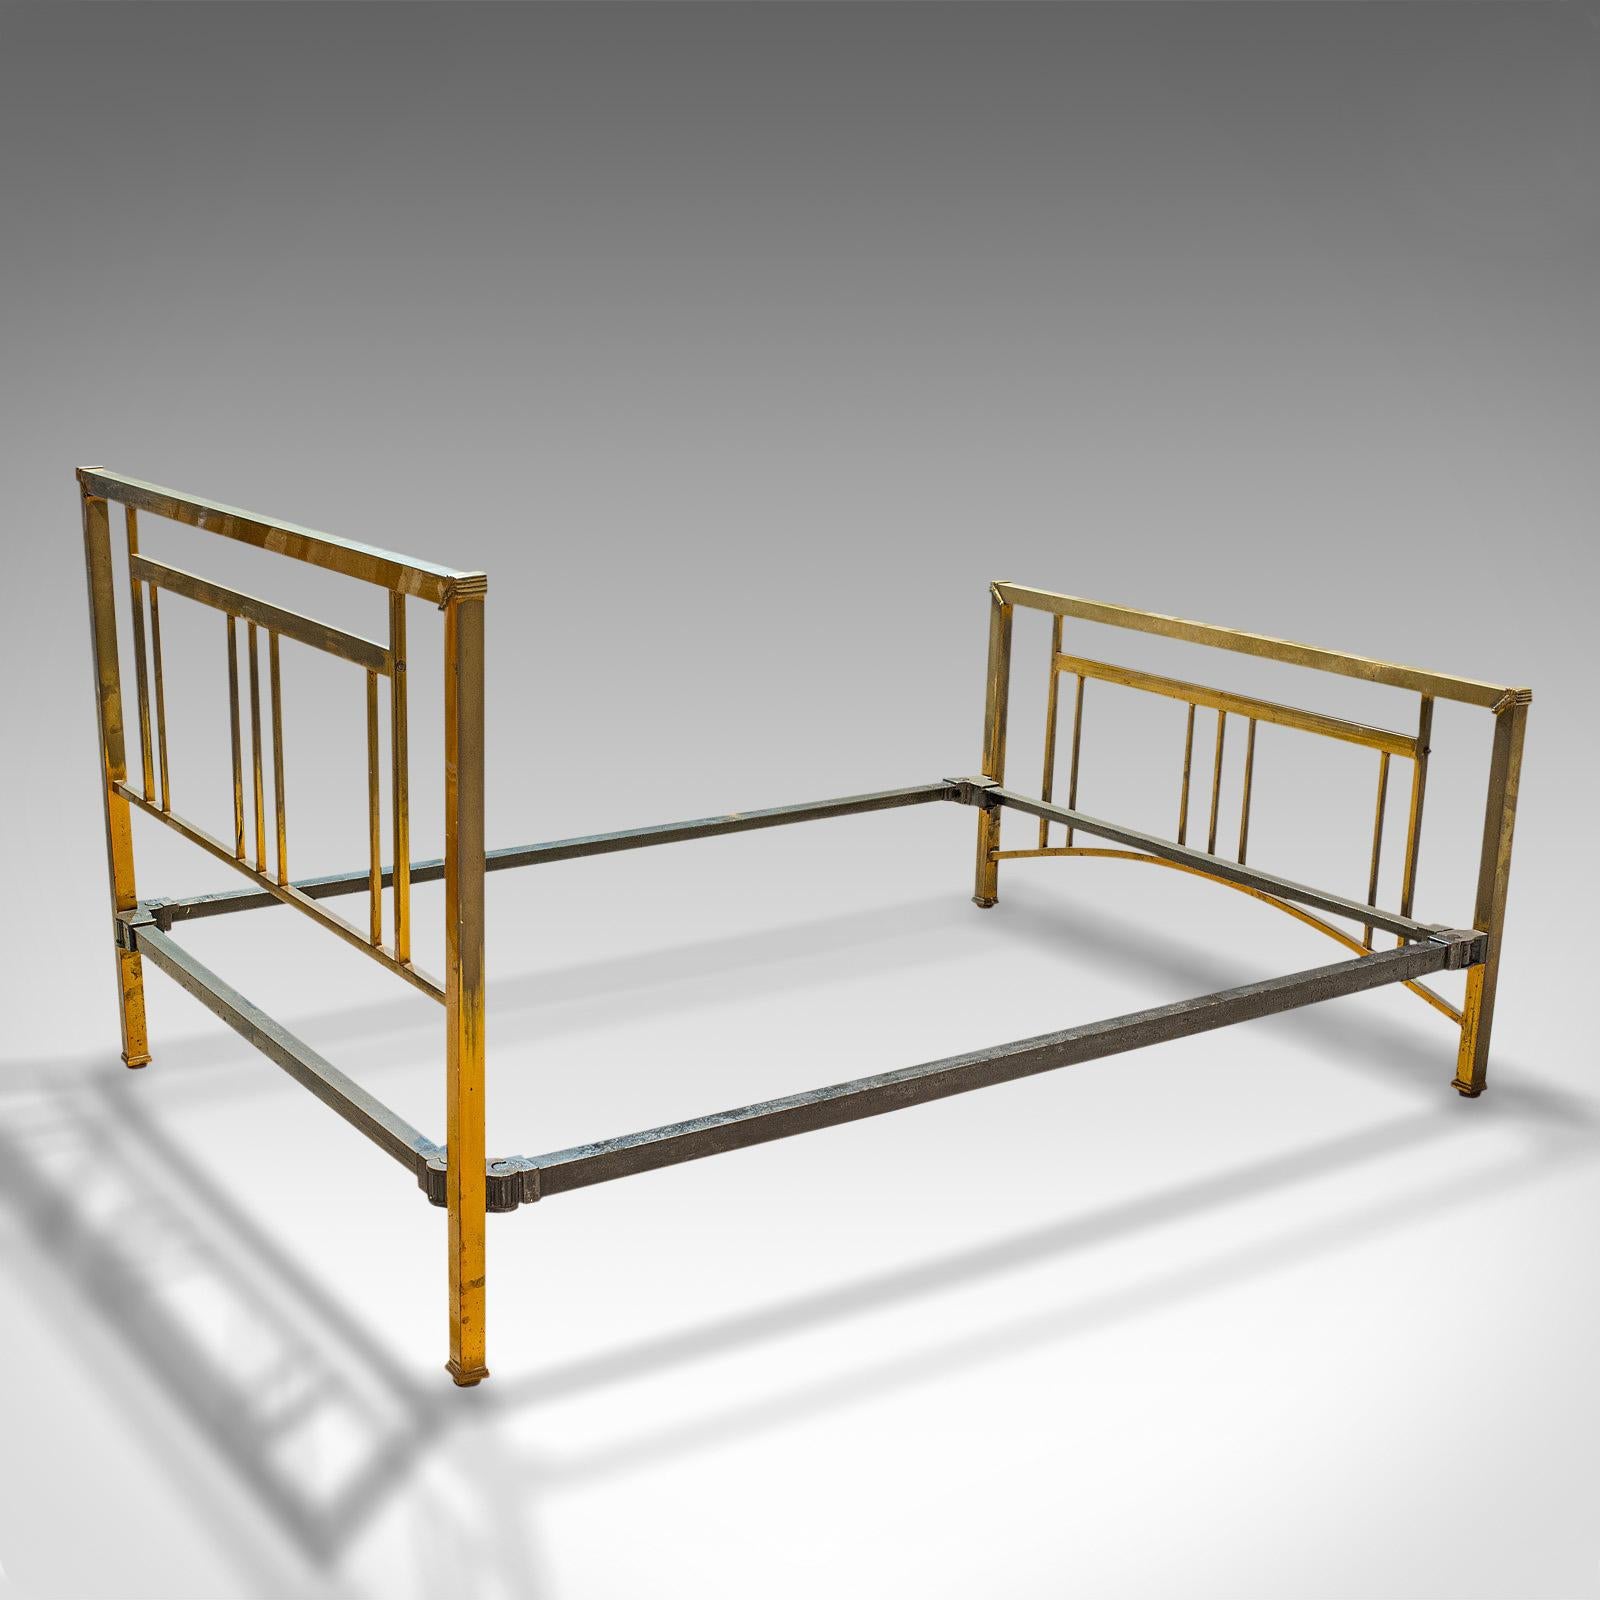 19th Century Antique Bed Frame, English, Brass, Iron, Double Bedstead, Victorian, circa 1880